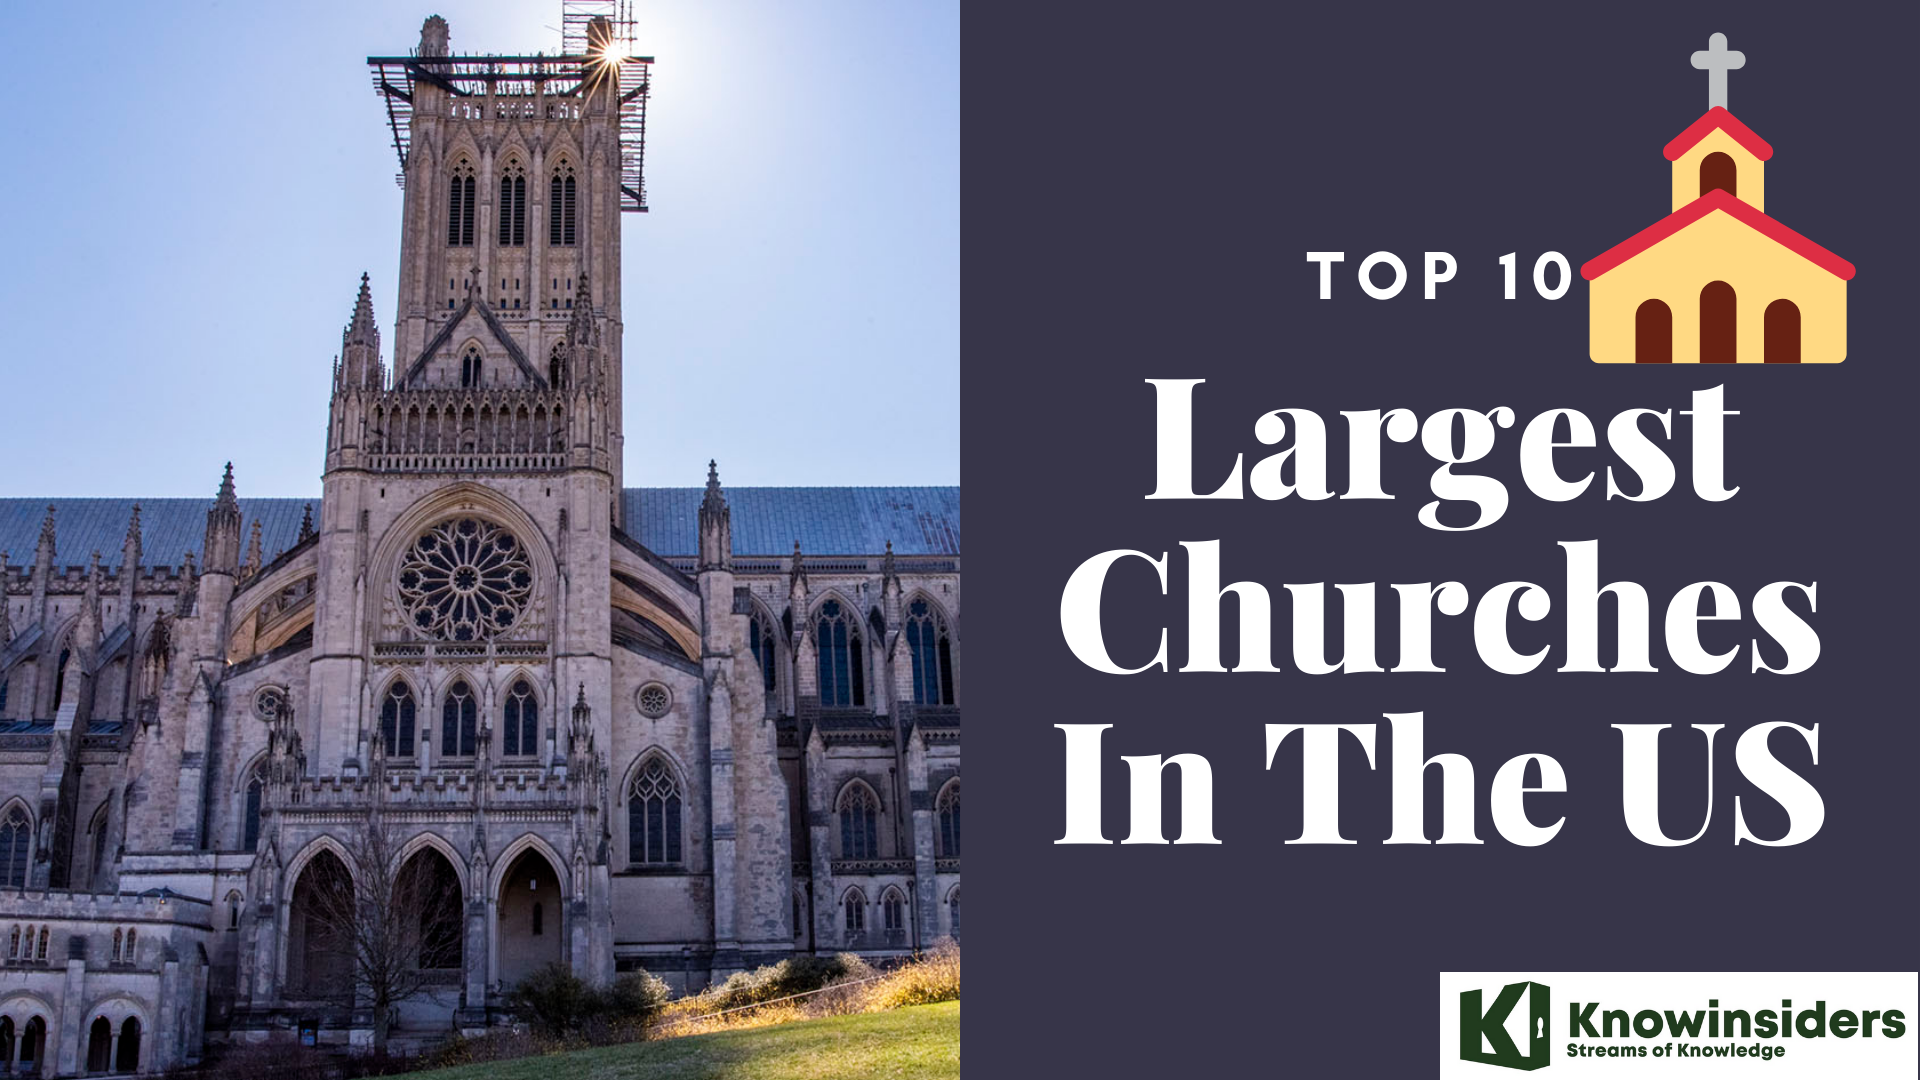 Top 10 Largest Churches In The US